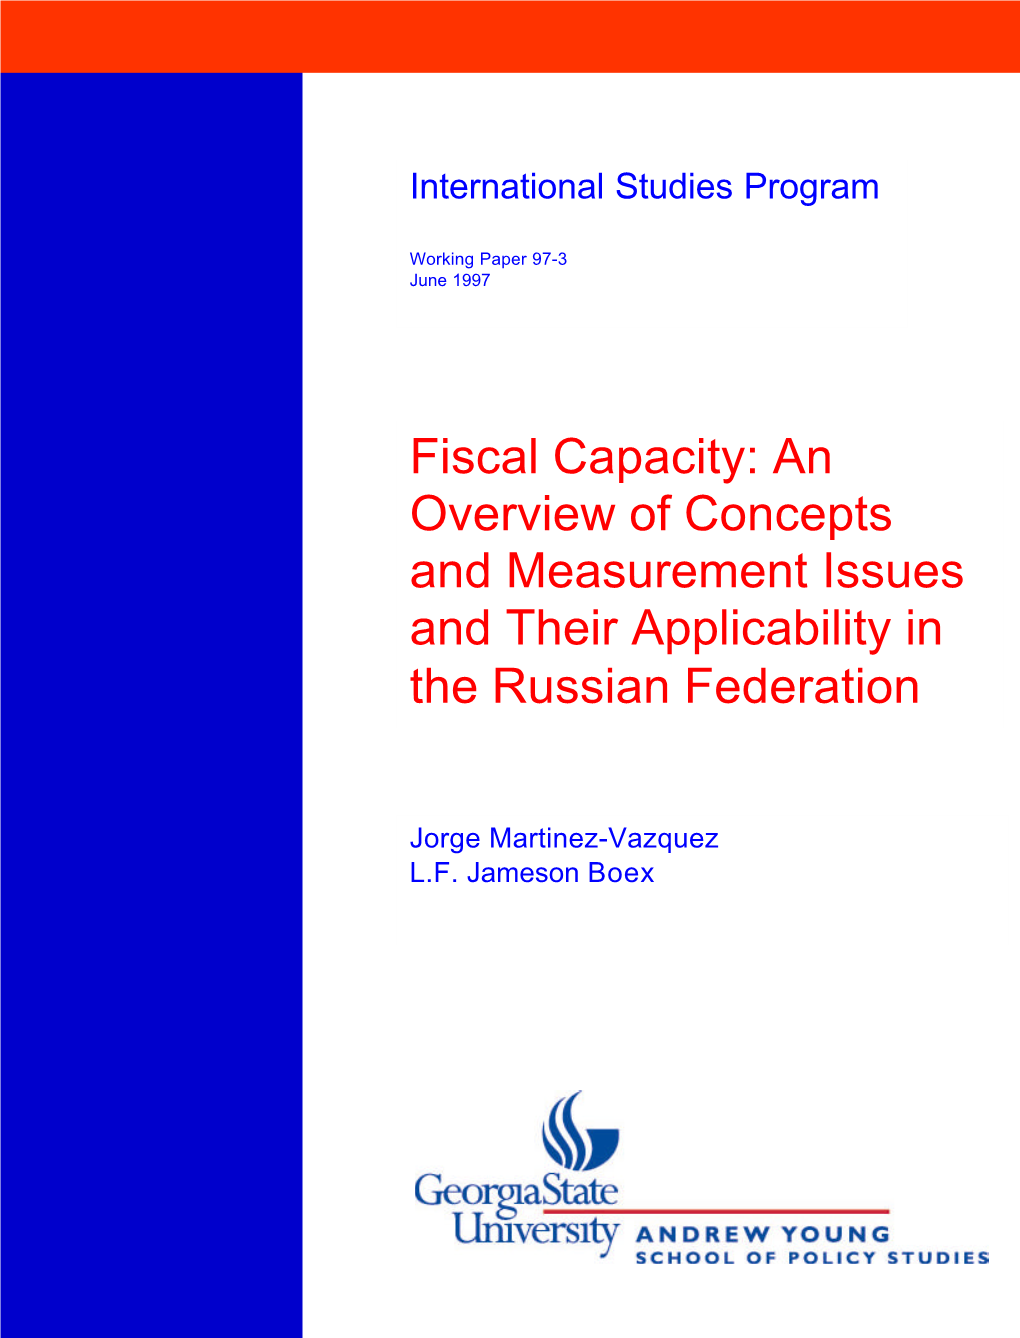 Fiscal Capacity: an Overview of Concepts and Measurement Issues and Their Applicability in the Russian Federation